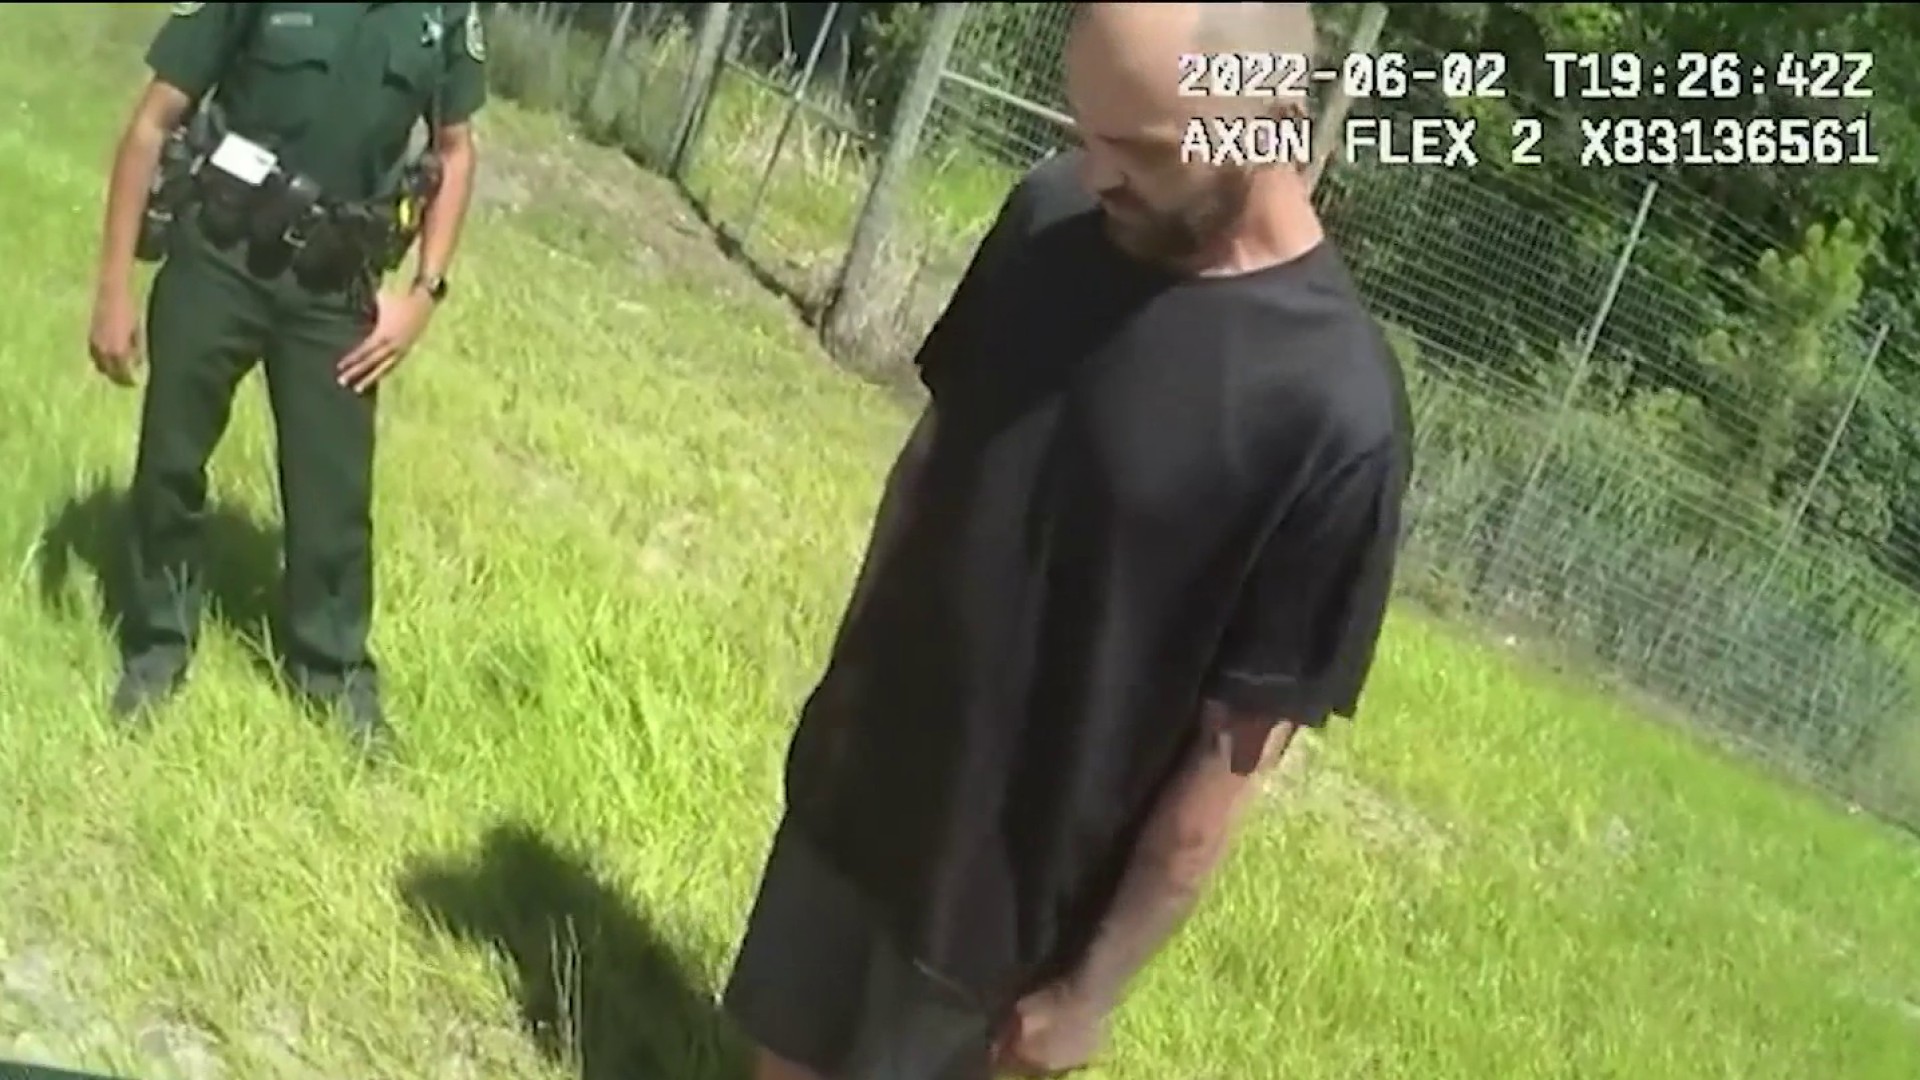 I don't know how to swim:' Video shows strange arrest on Volusia